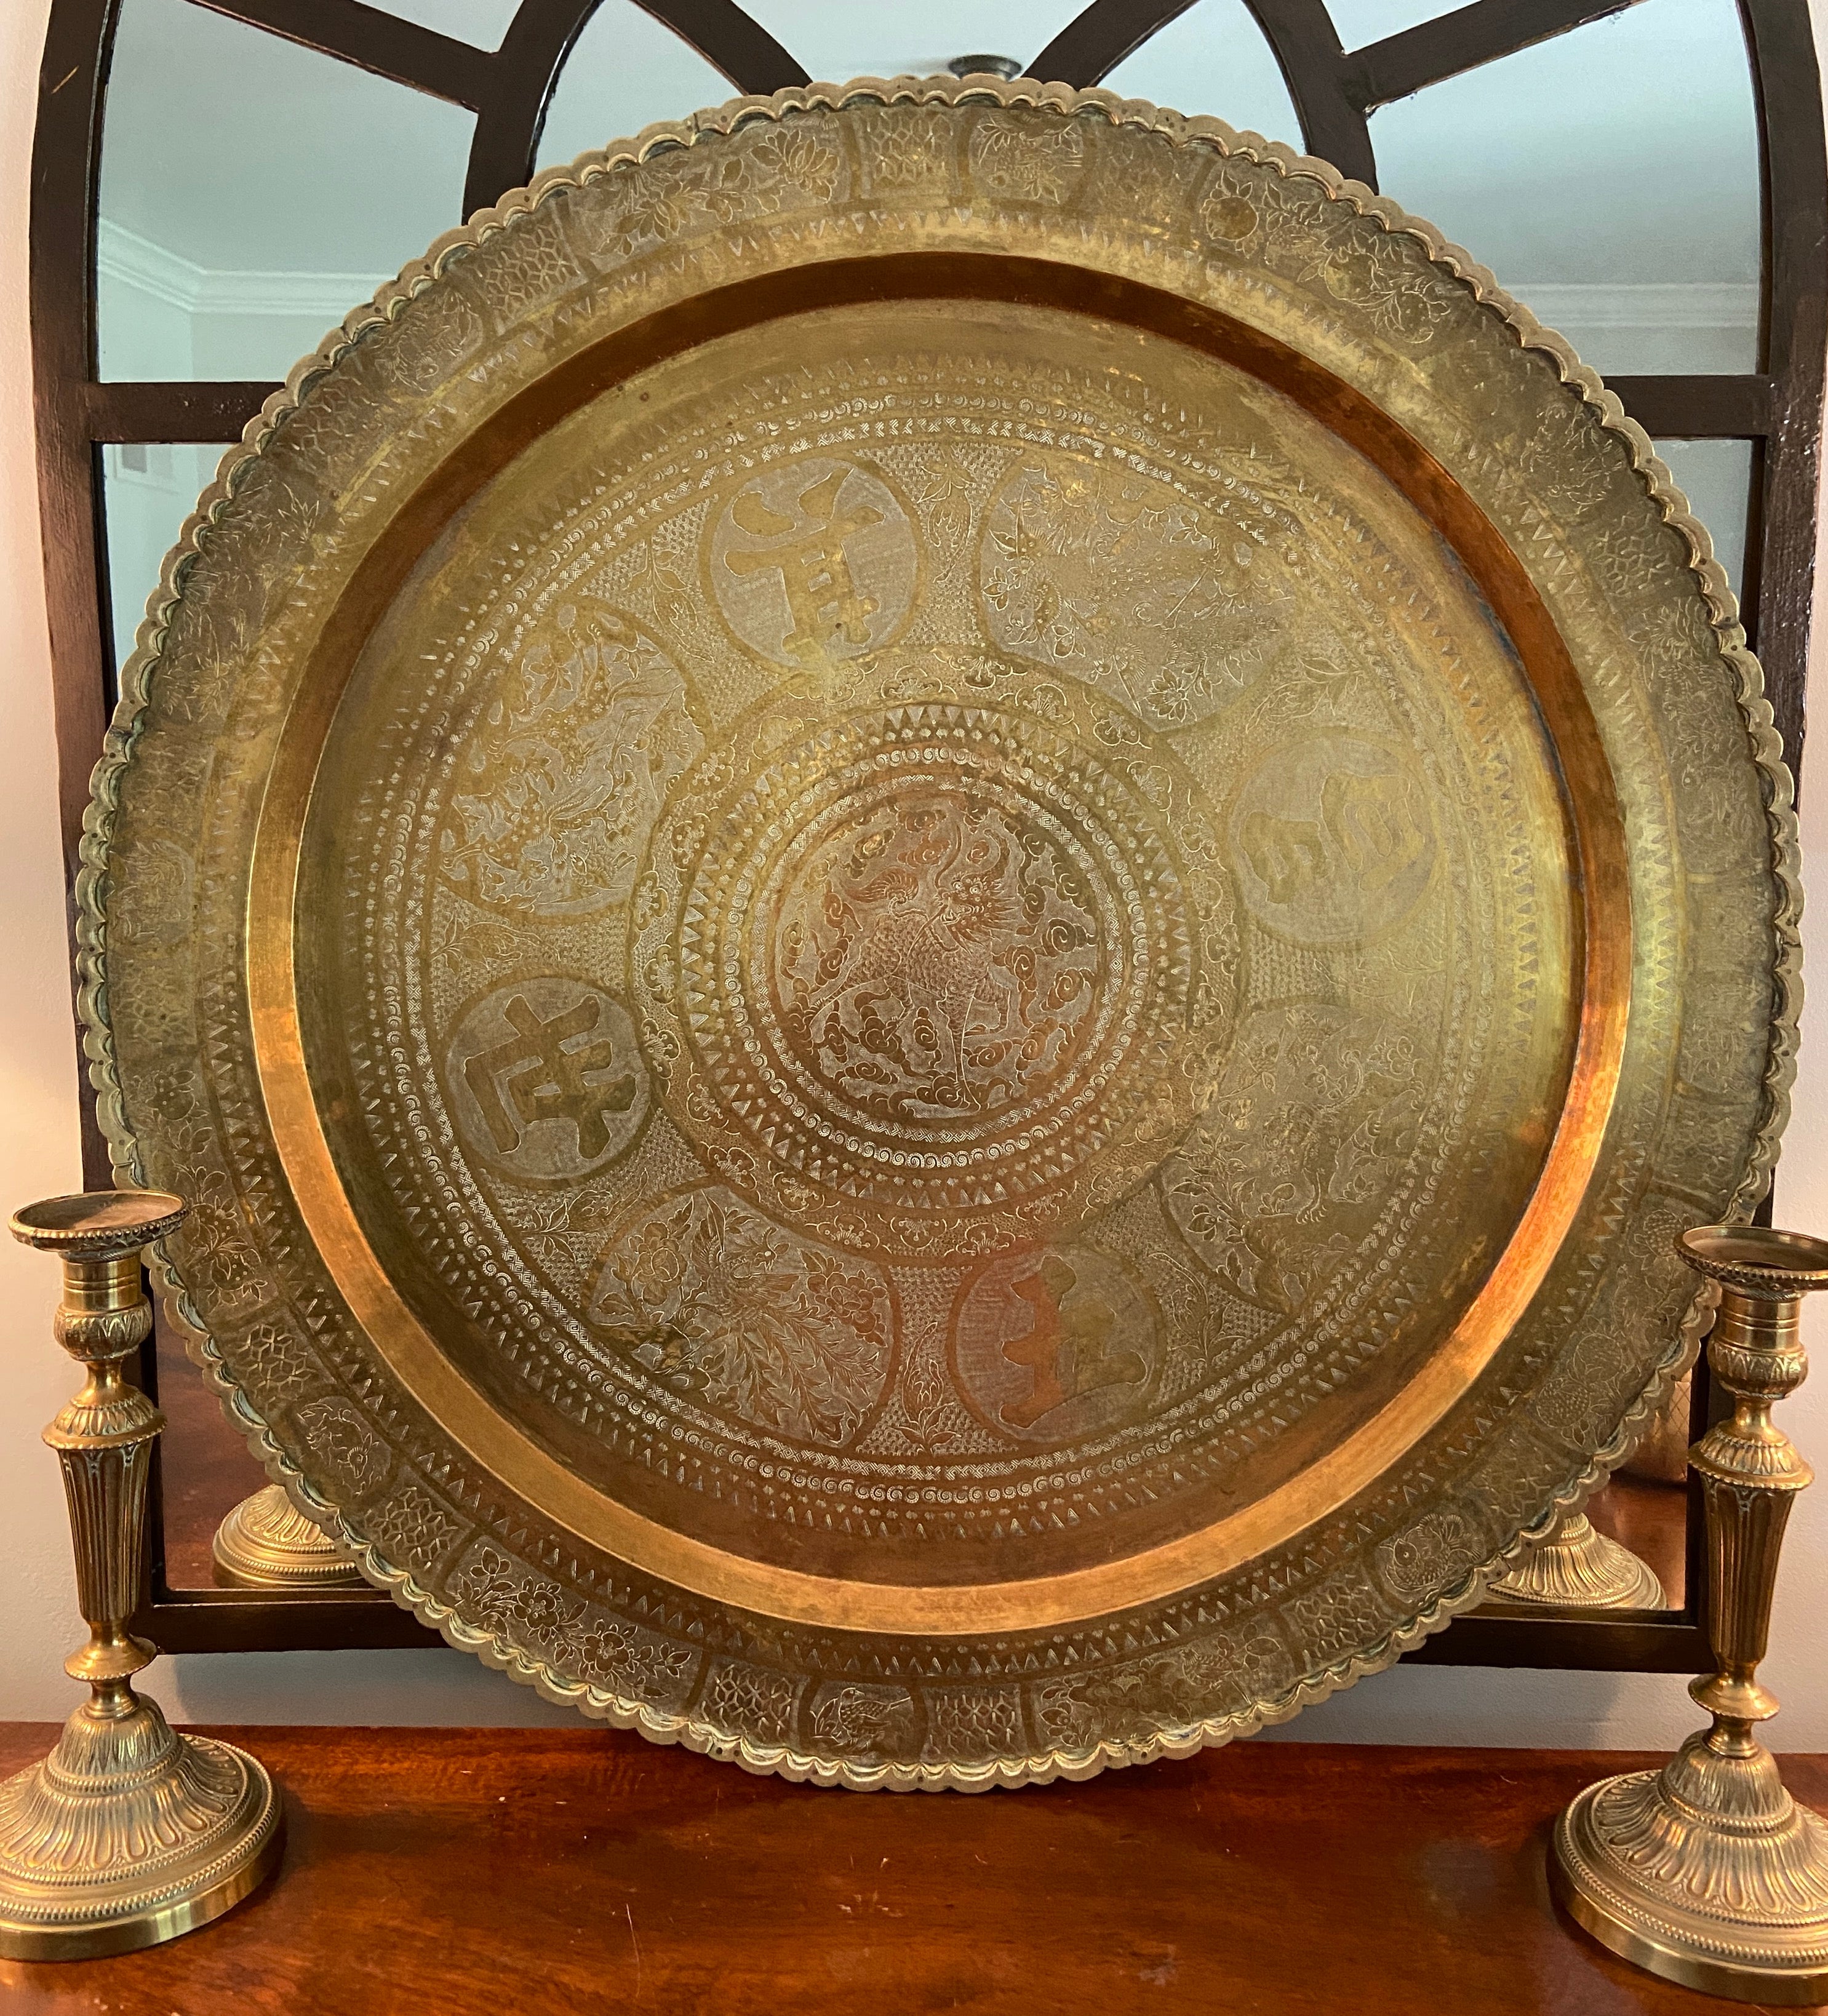 China trade cast and engraved brass tray (1880) – The Federalist